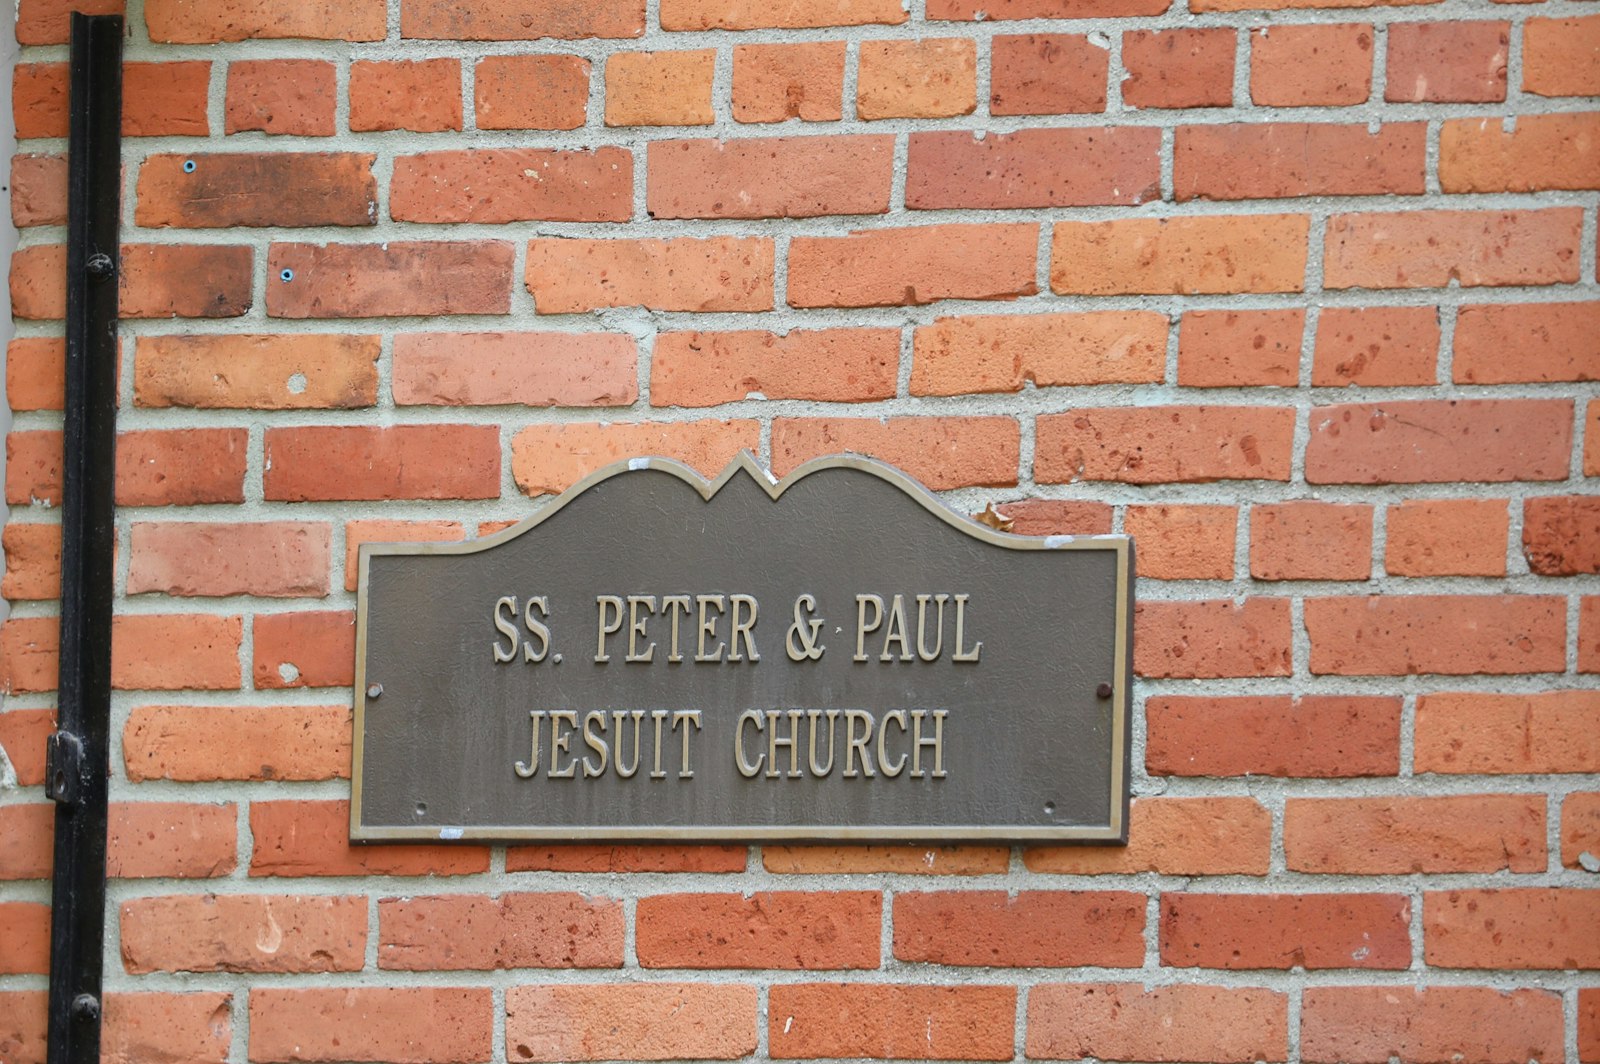 SS. Peter and Paul (Jesuit) Church on the corner of Jefferson Avenue and St. Antoine hosted an open house and 'Checkered Flag Mass,' where they welcomed race fans to the church for a Saturday evening Mass since a Sunday Mass would be difficult with the backstretch of the track running right before the parish.